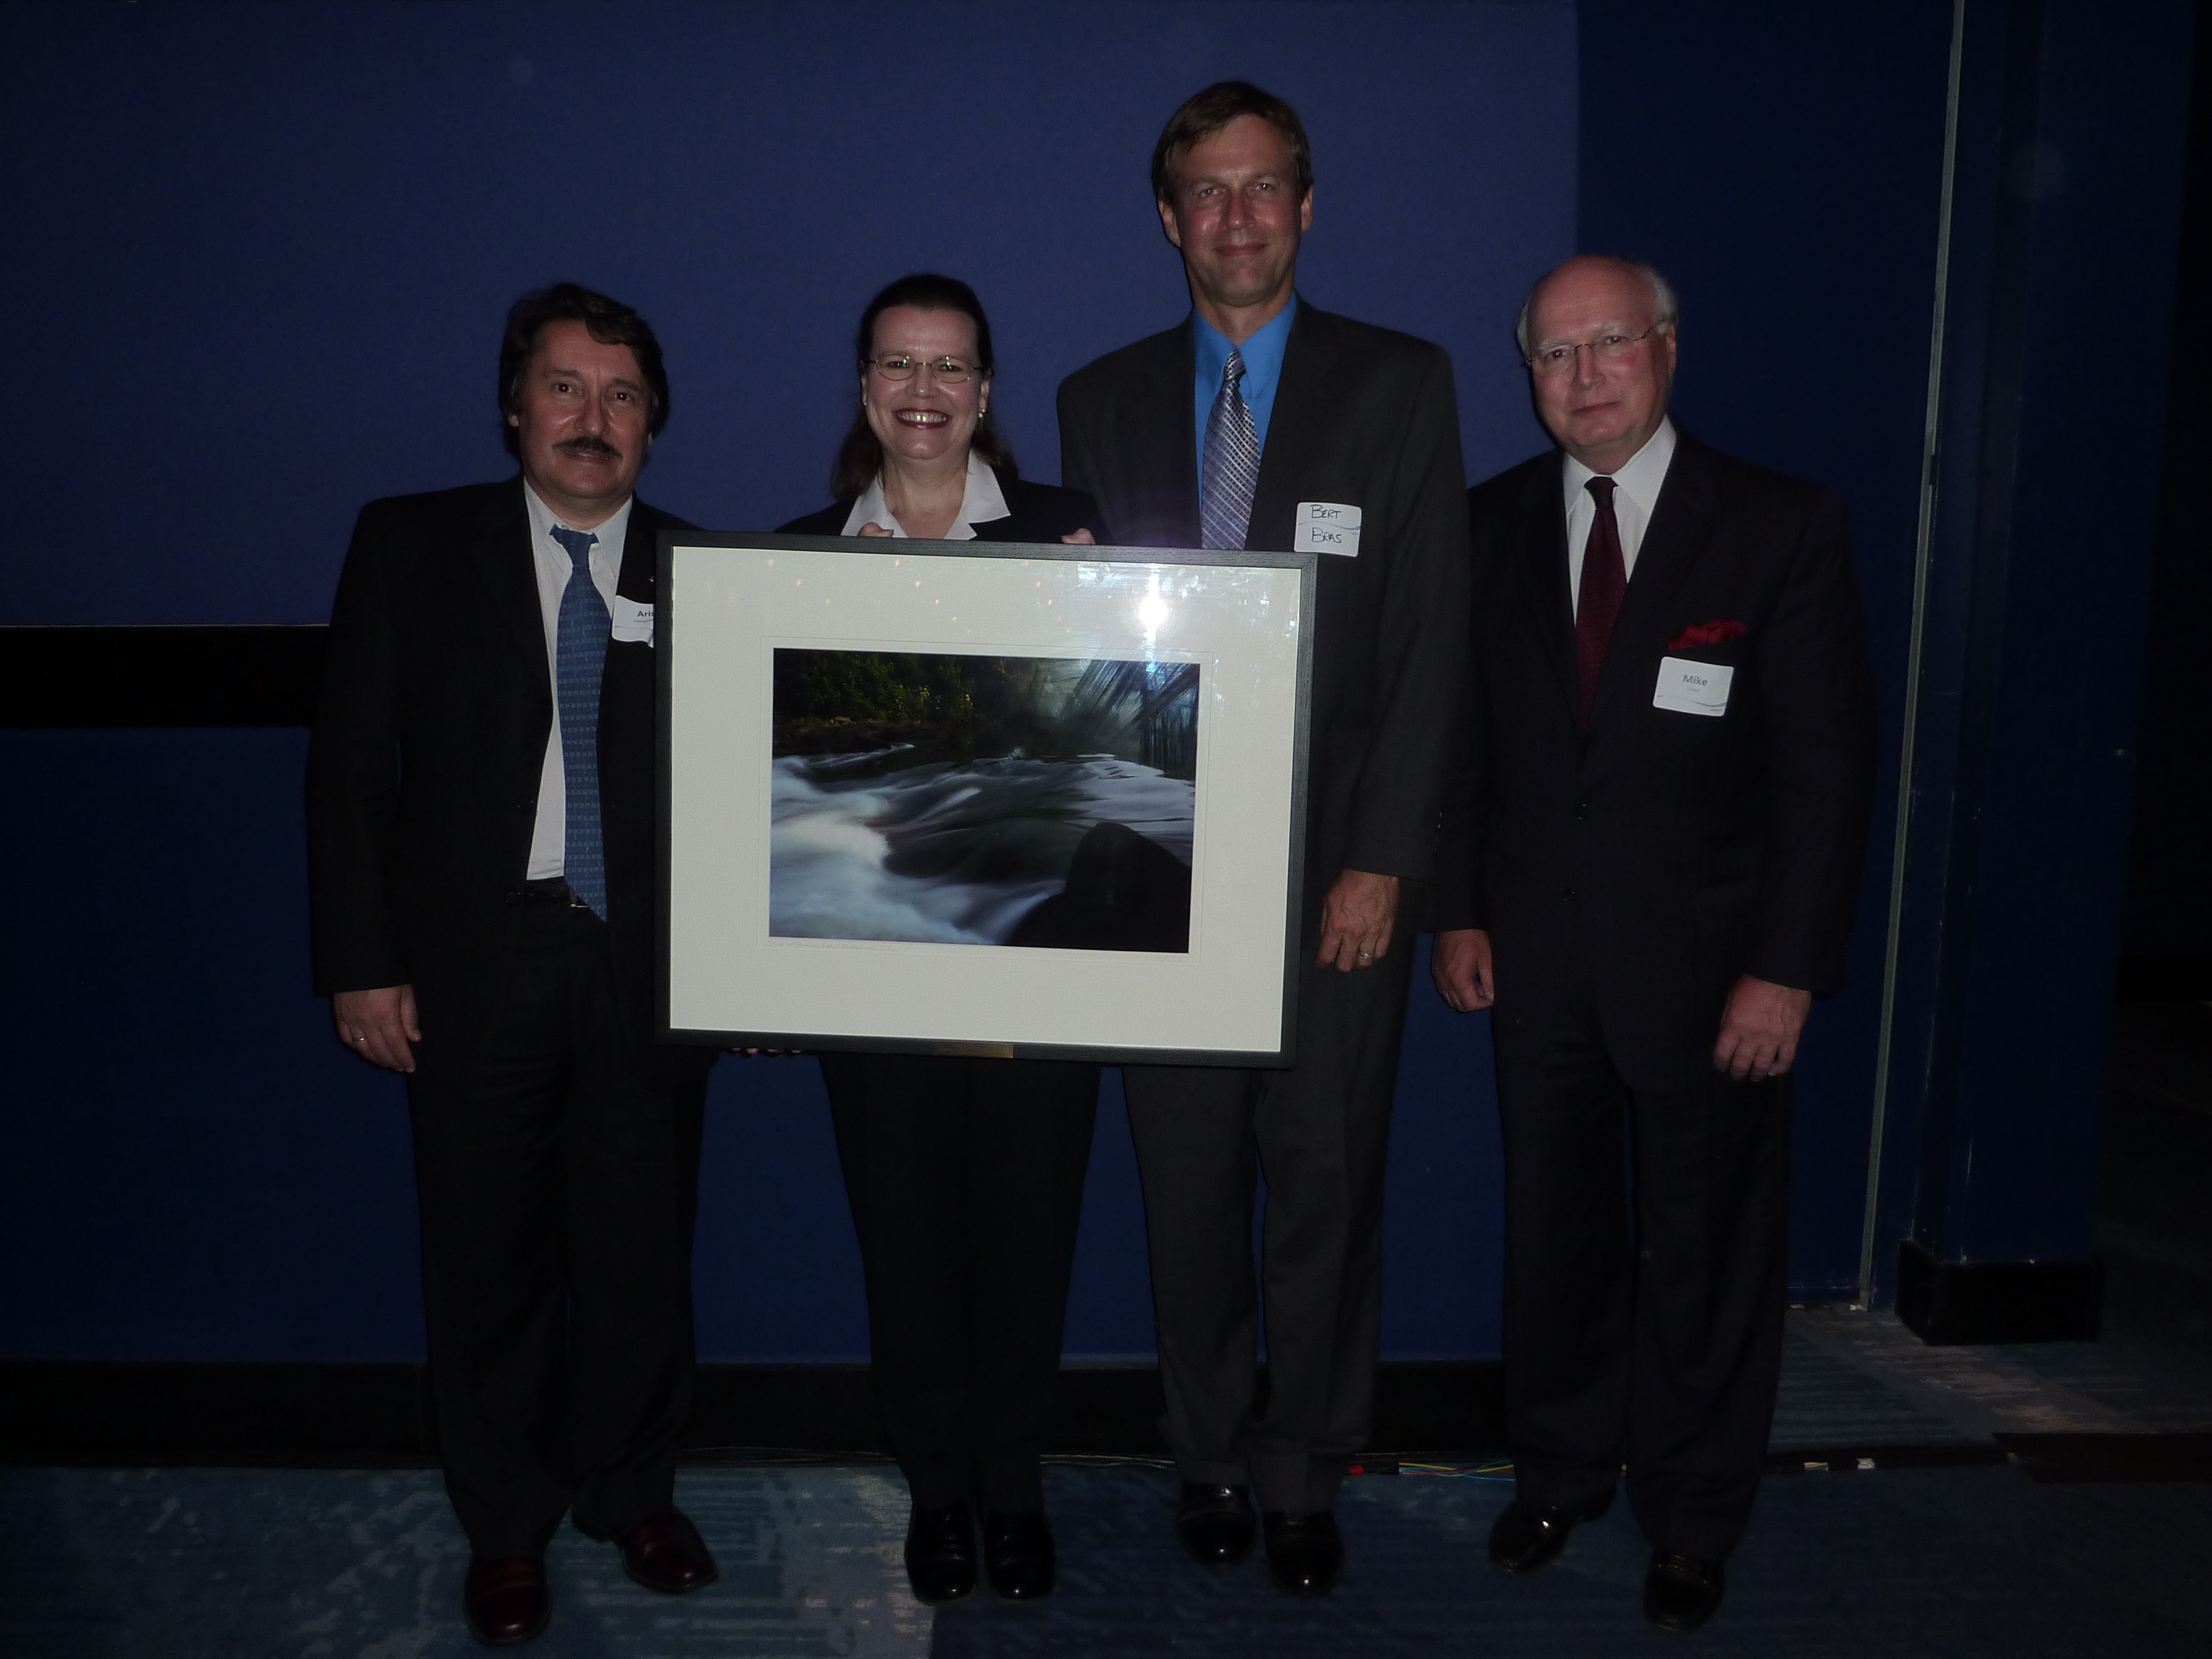 Georgia Tech received Upper Chattahoochee Riverkeeper’s first River
Sustainability Award for the university’s significant investment in and
leadership on behalf of water and energy efficiency as exemplified by campus
sustainability programs. Shown (left to right)  Aris Georgakakos, Director, Georgia Water Resources Institute; Marcia Kinstler, Georgia Tech sustainability director; Bert Bras, director, Sustainable Design and Manufacturing Center and Mike Eckert, venture fellow with Georgia Tech’s Ventu